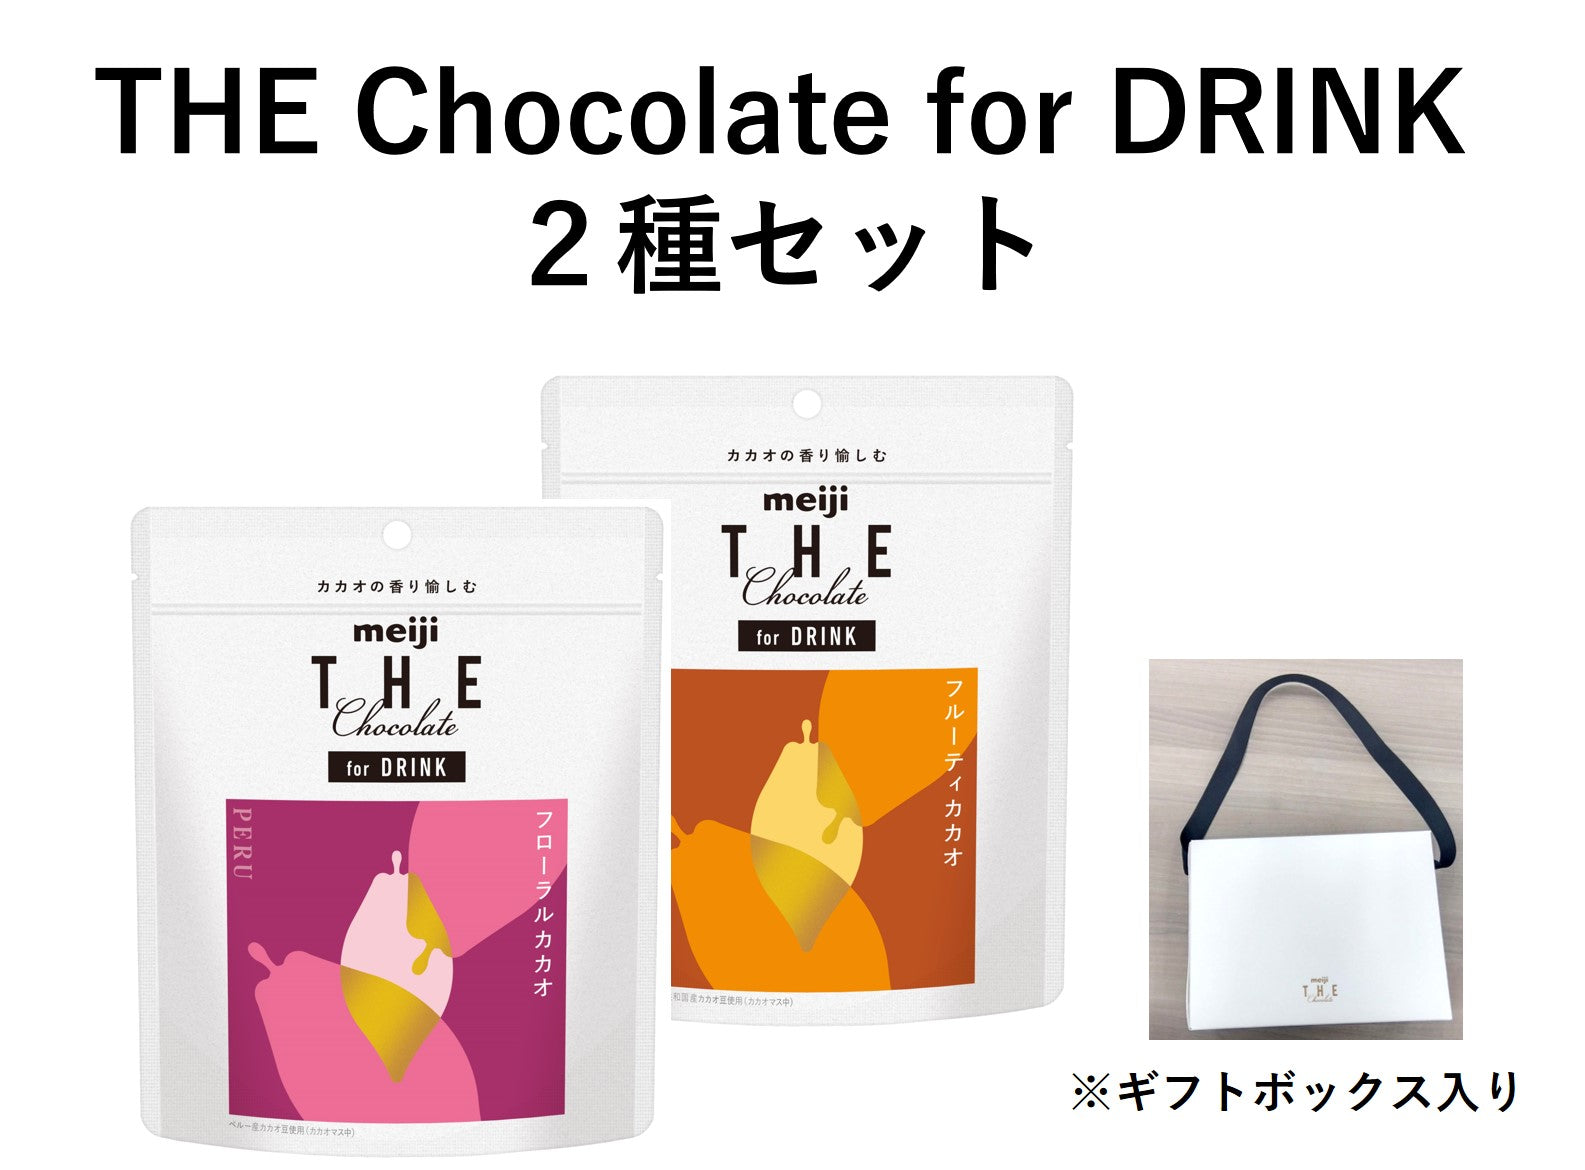 meiji THE Chocolate for DRINK ２種セット